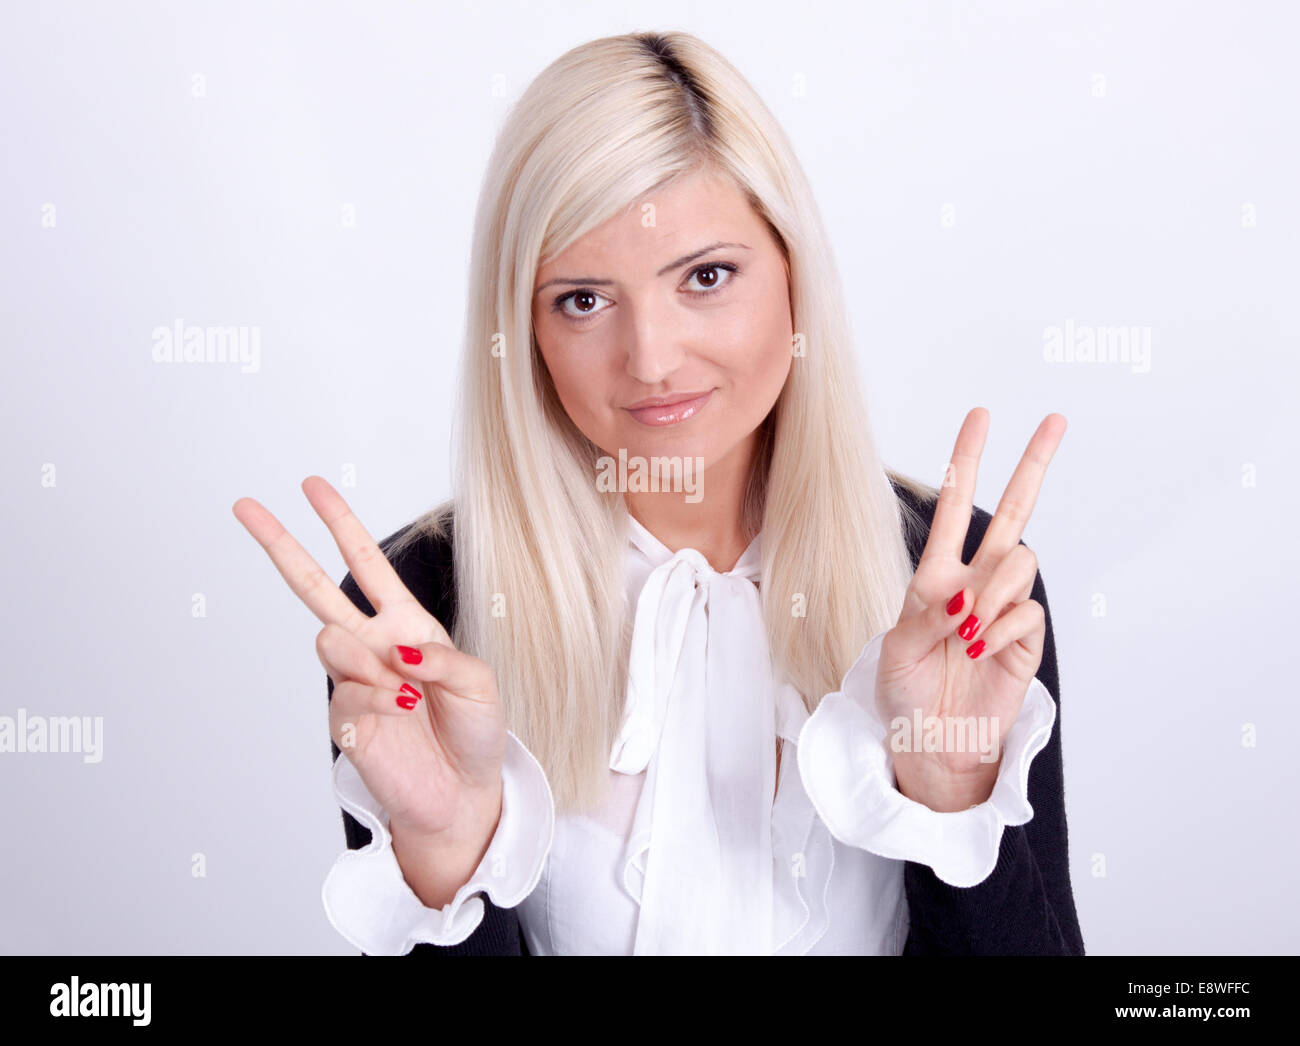 Female peace gesturing with hand, isolated on white Stock Photo